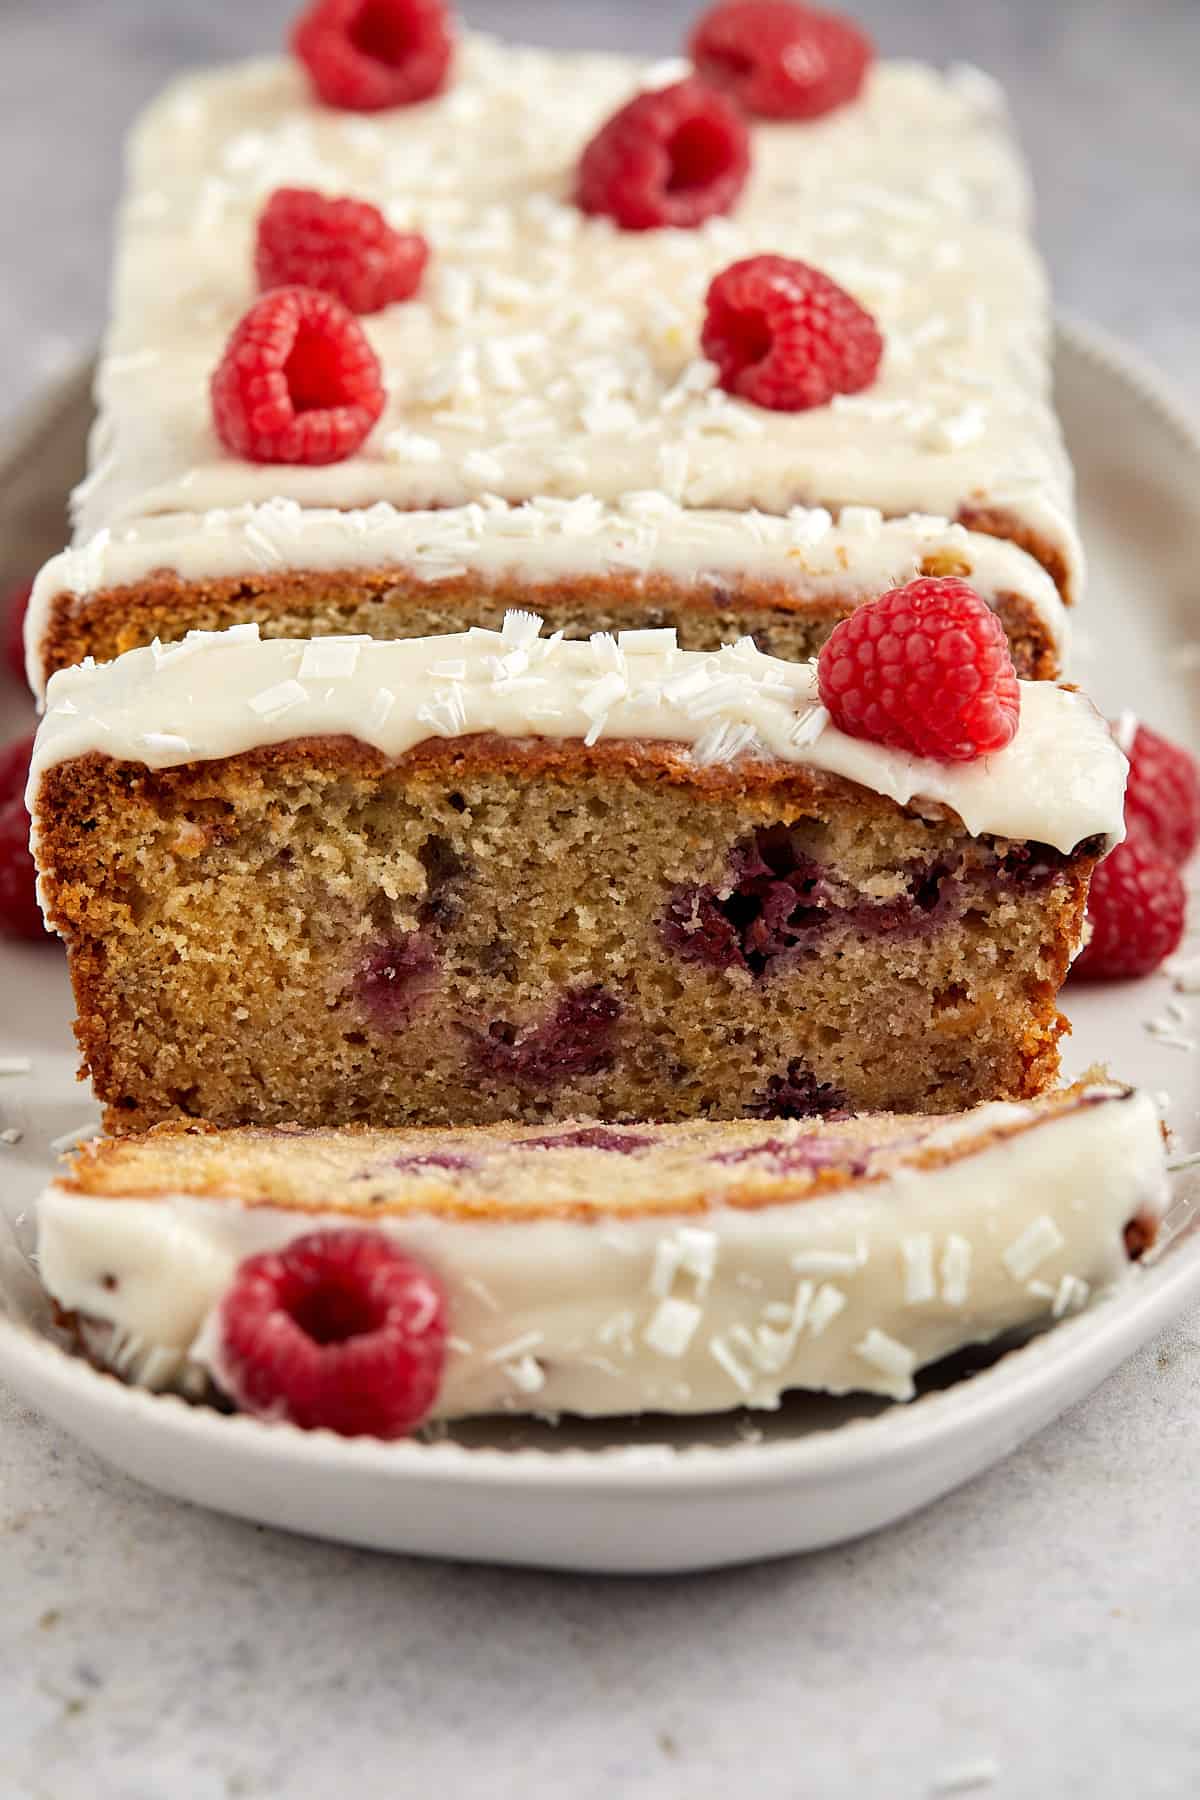 The image features a sliced raspberry and white chocolate loaf cake with white icing on top, garnished with fresh raspberries and sprinkled with white chocolate shavings. One slice is partially pulled out, revealing the moist interior of the cake studded with raspberries. The cake is placed on a light-colored plate, which sits on a textured surface. The photo captures the appealing texture and color contrast between the cake, the creamy icing, and the bright red raspberries.





